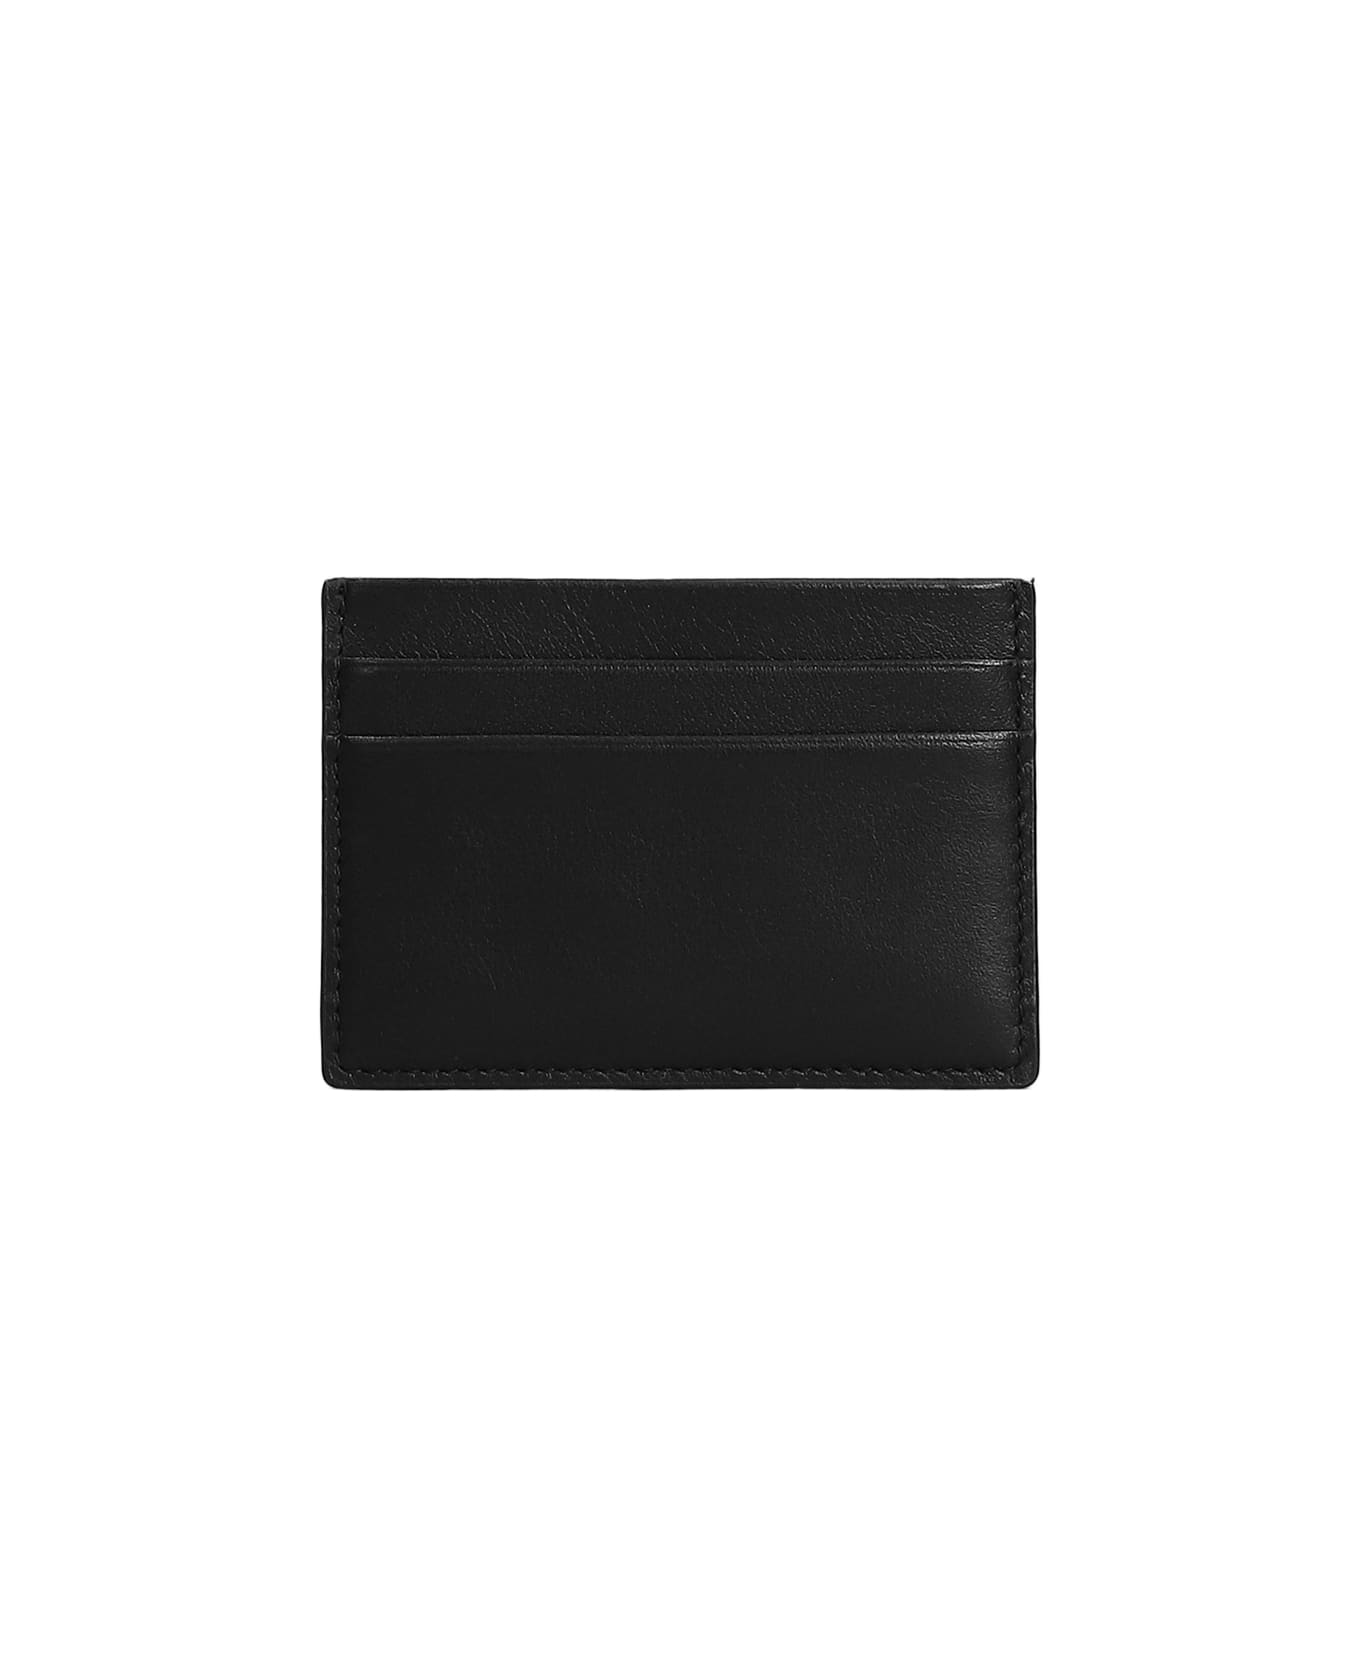 Common Projects Wallet In Black Leather - black 財布